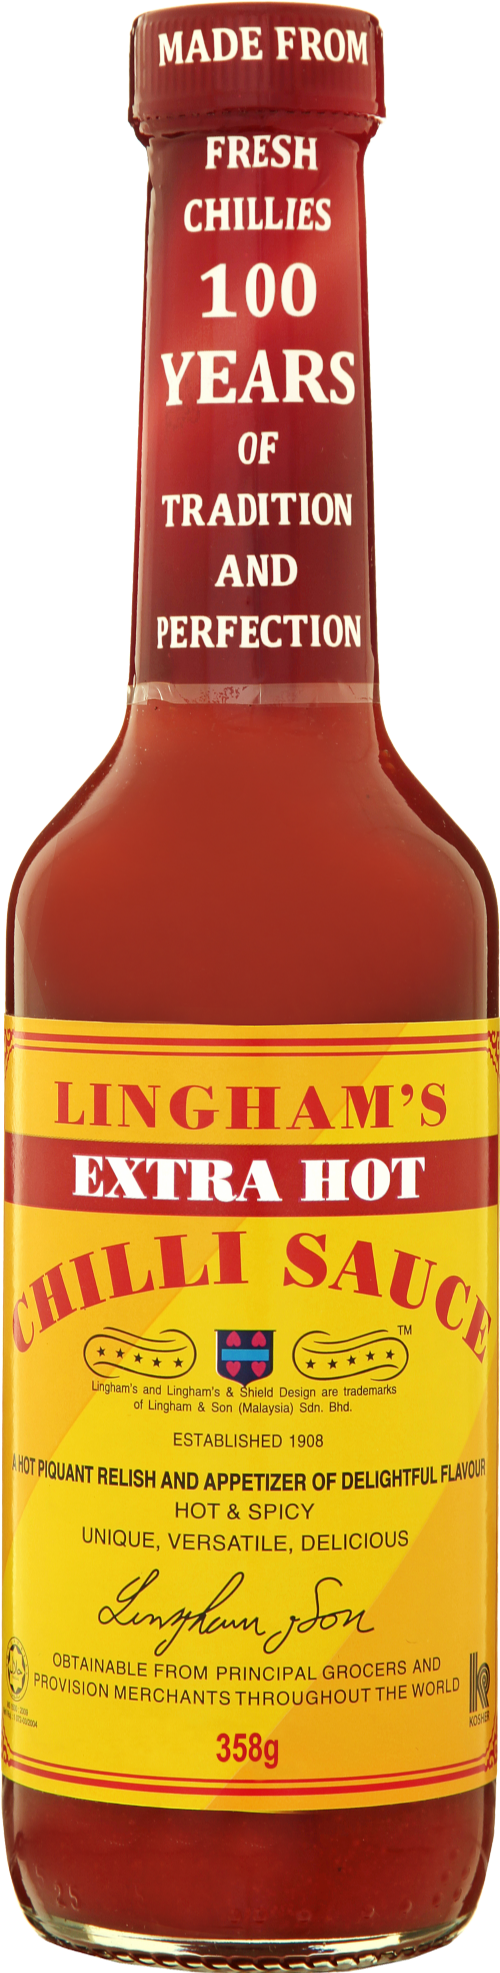 LINGHAMS Extra Hot Chilli Sauce 358g